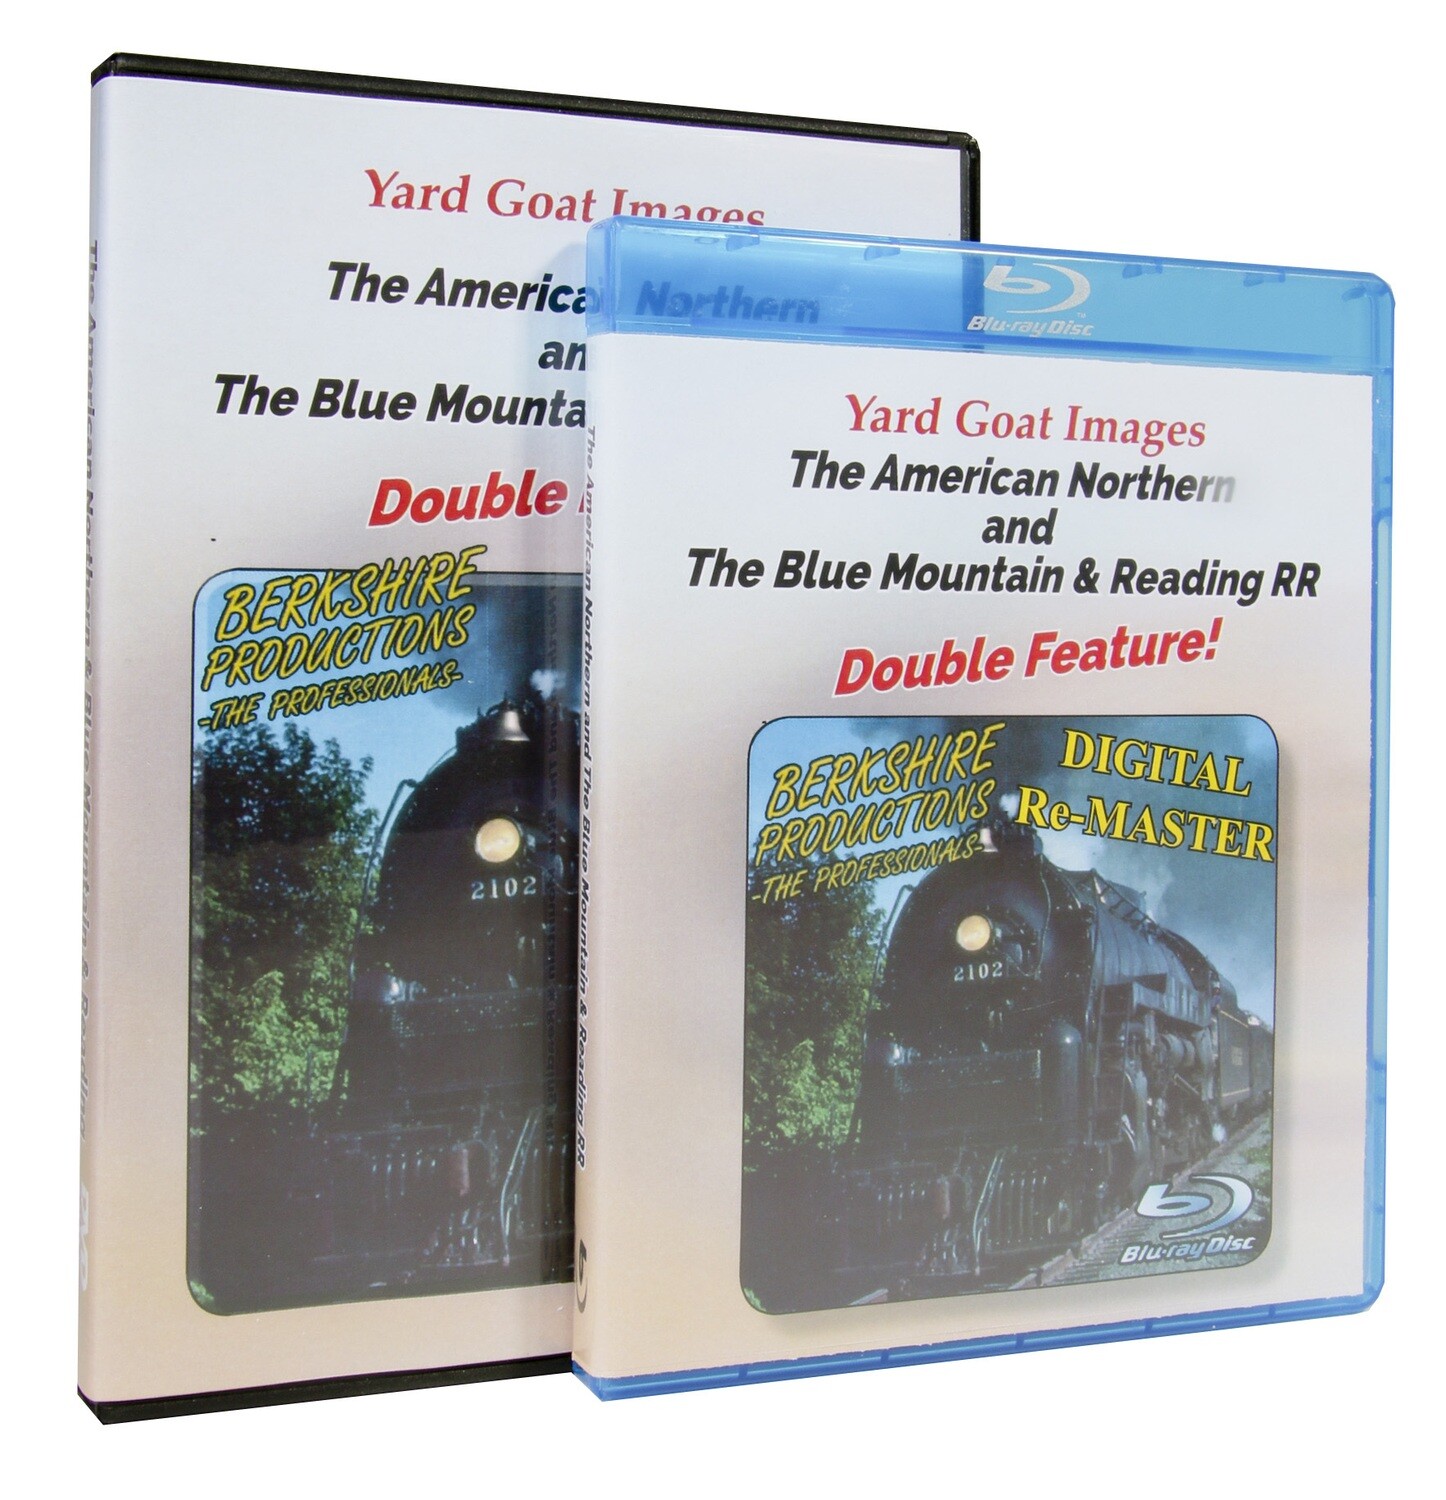 2102: The American Northern and Blue Mountain & Reading - YGI Classics